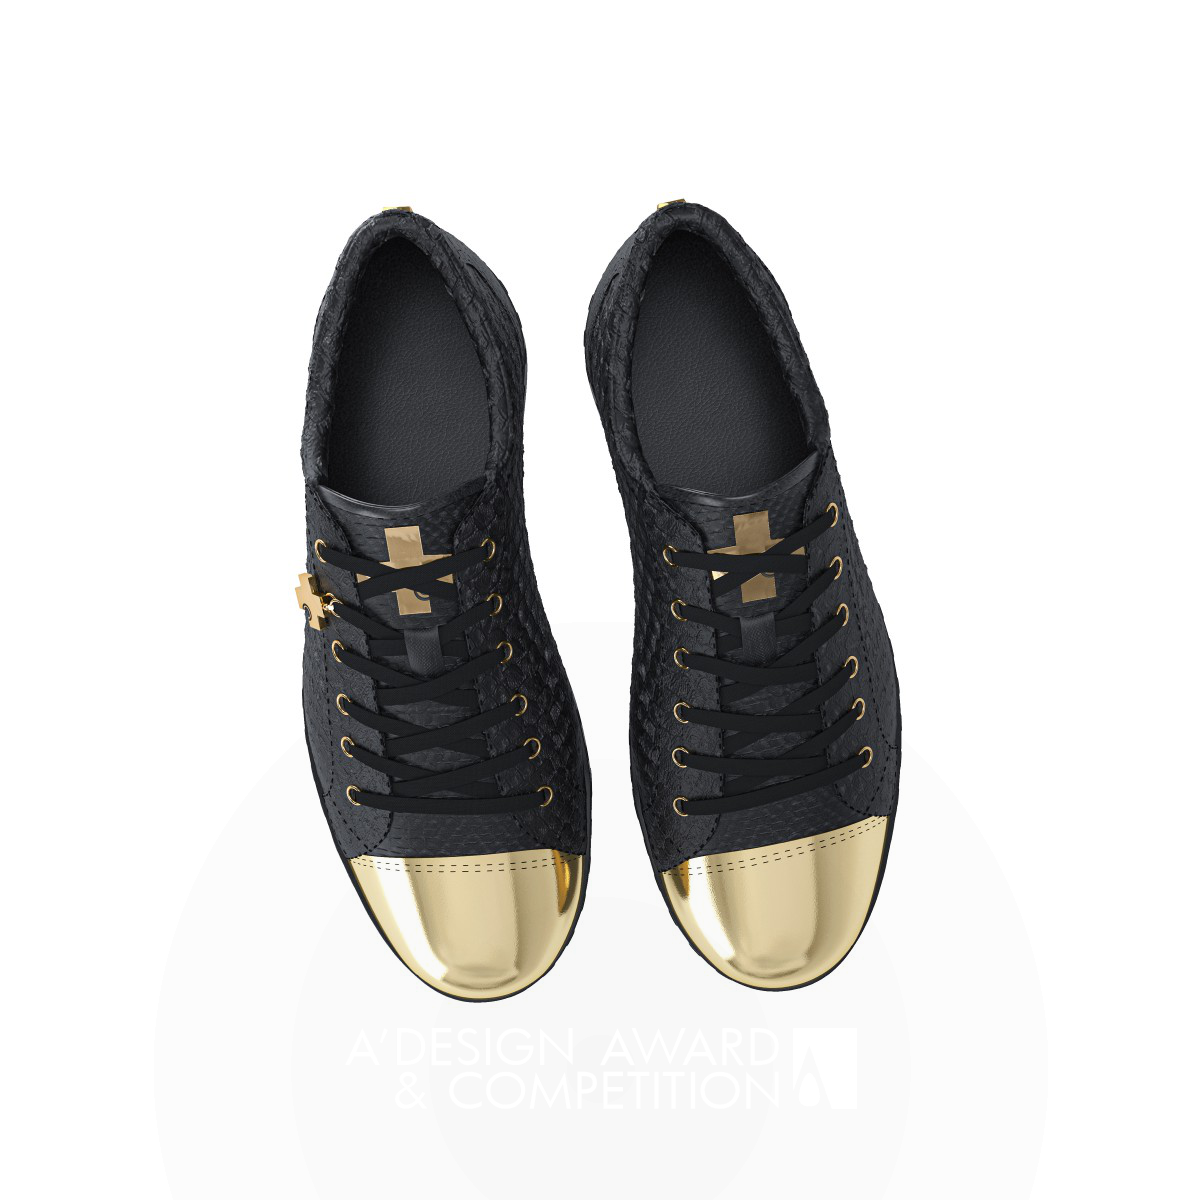 The Sneaker: Combining Boldness and Elegance